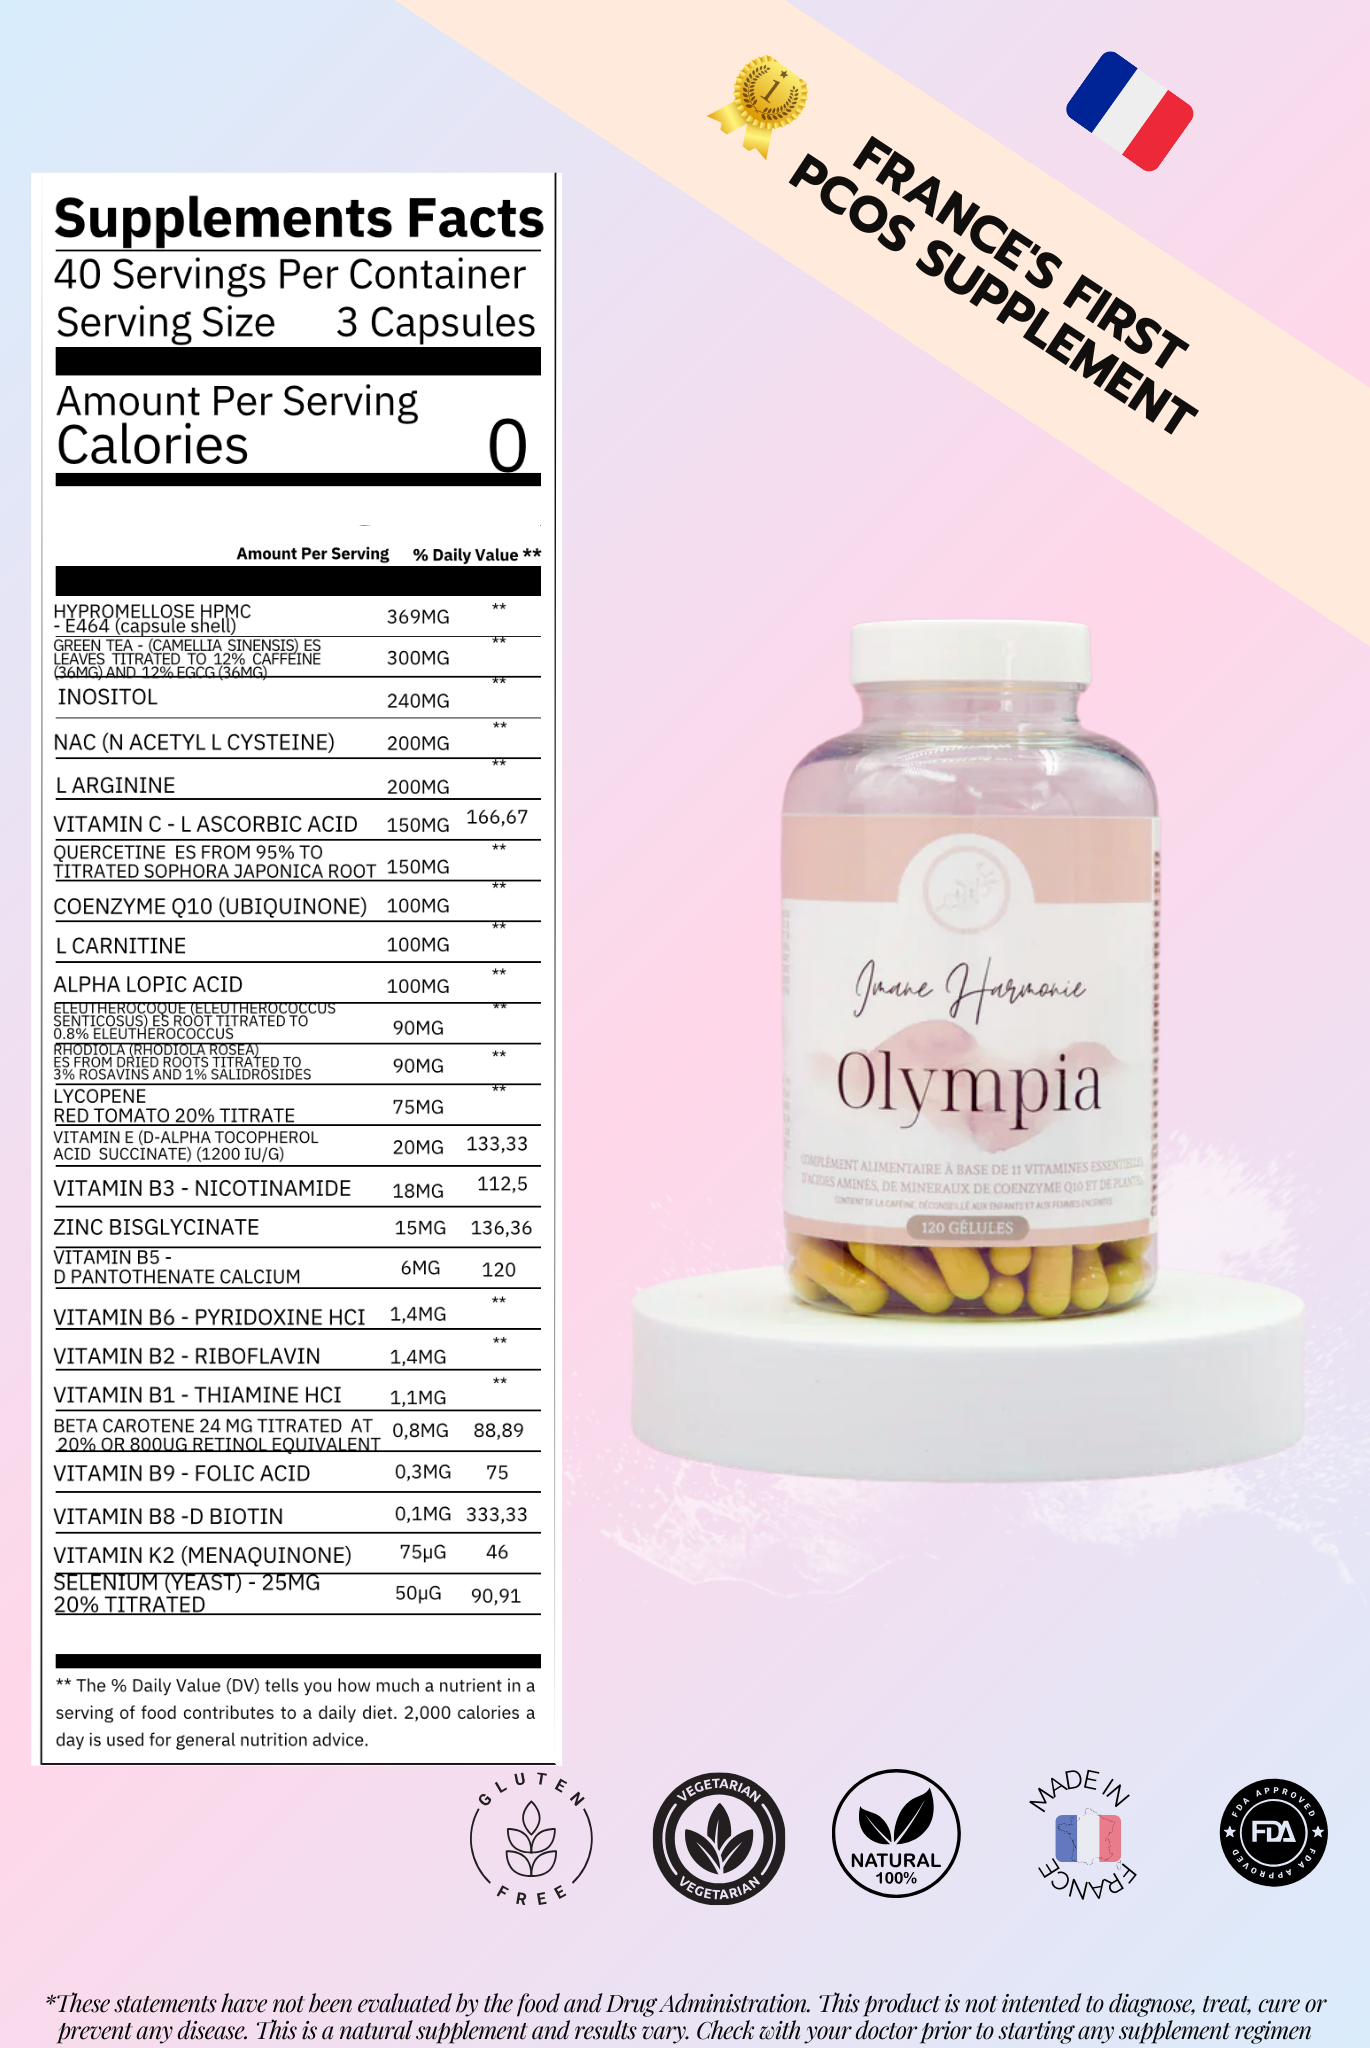 Supplements facts of Olympia